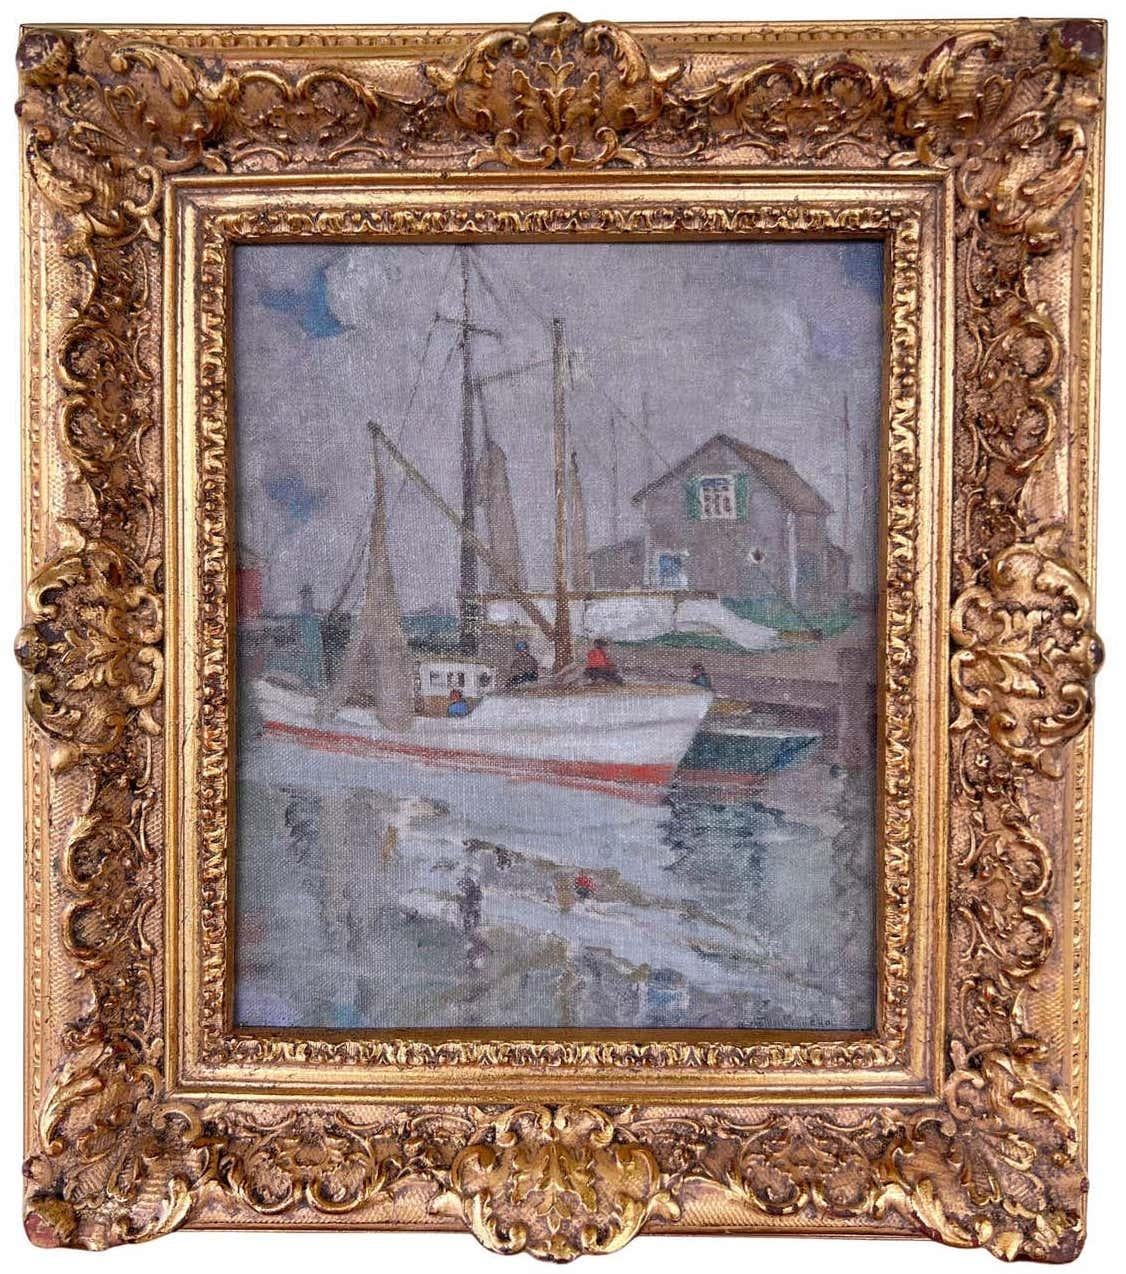 Kate Montague Hall Landscape Painting - Fishing Boat on the Dock